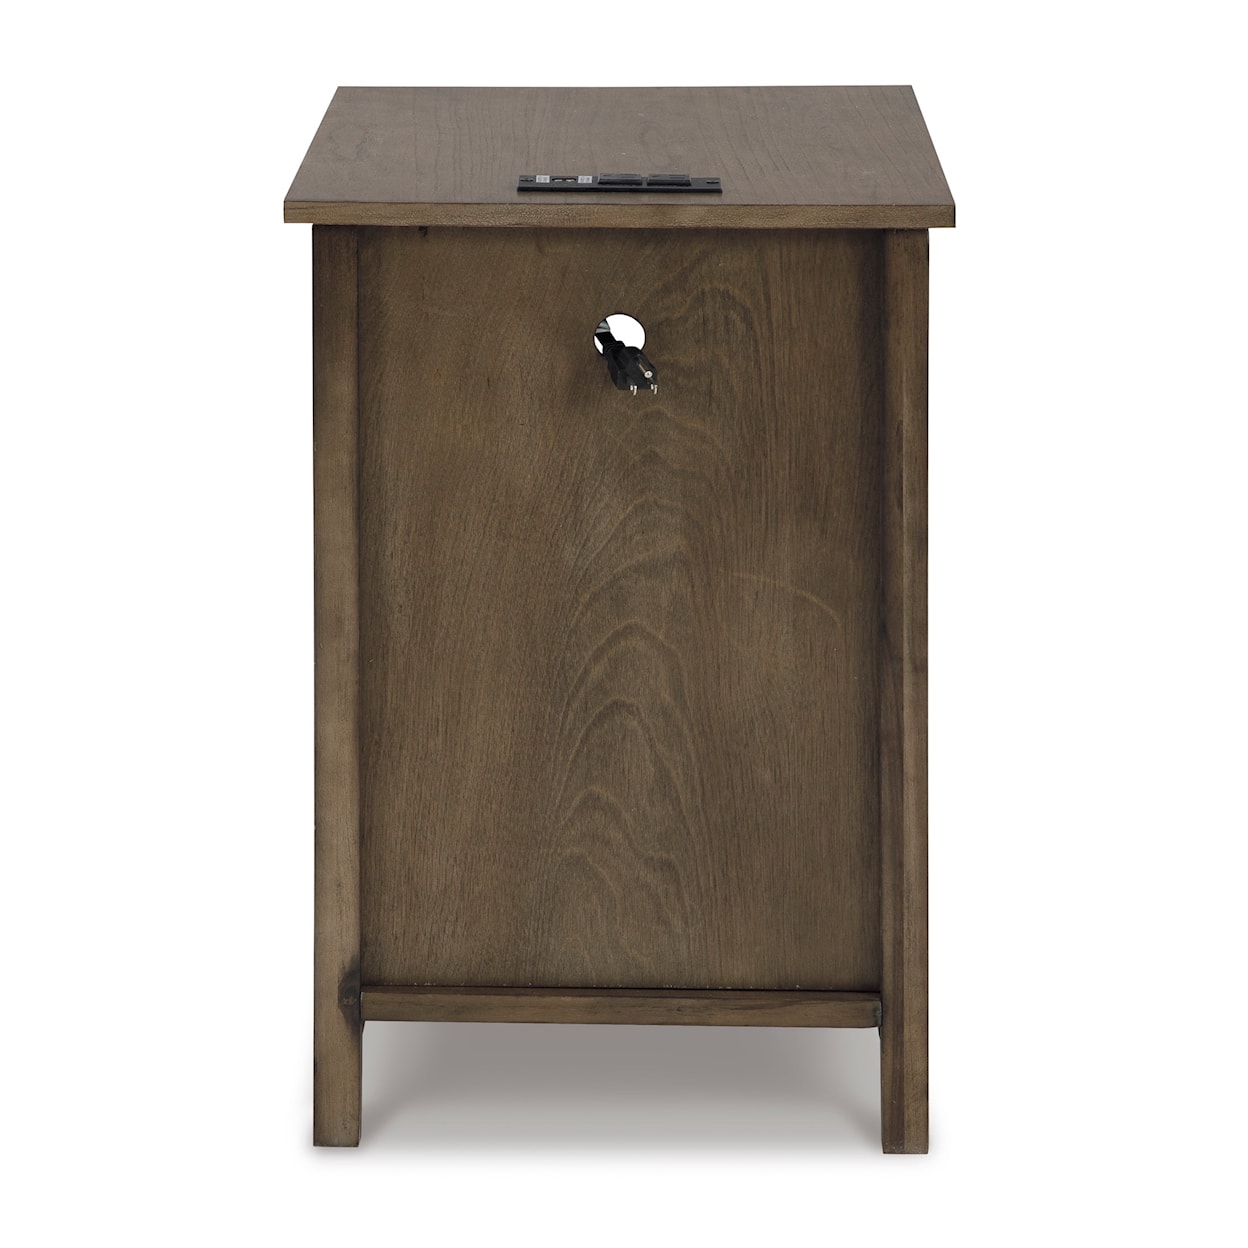 Signature Design Treytown Chairside End Table